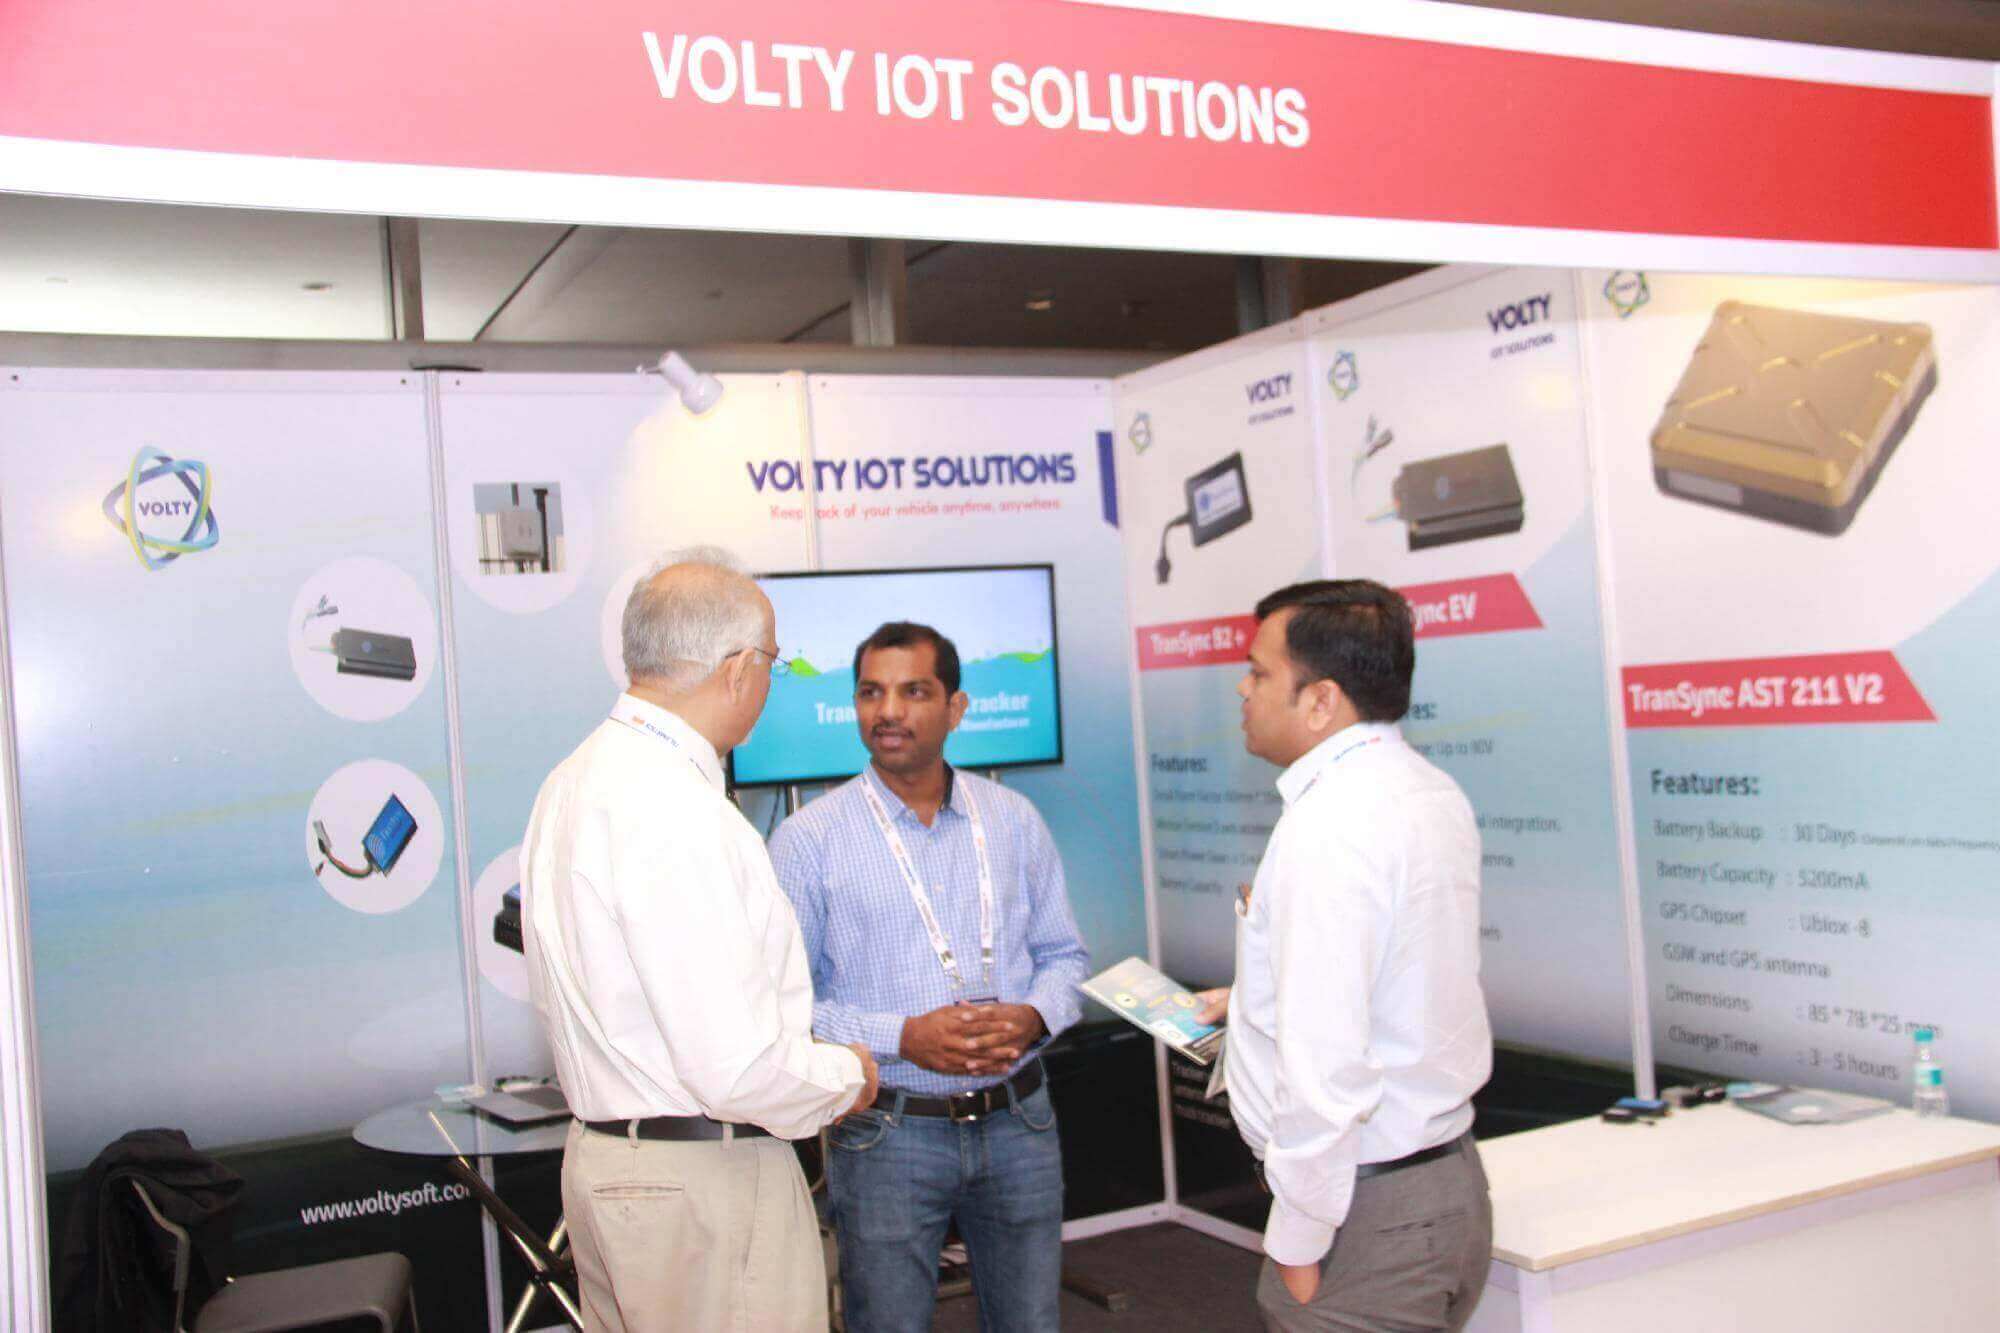 volty-Gps tracker for bike manufacturer - stall at telematics india